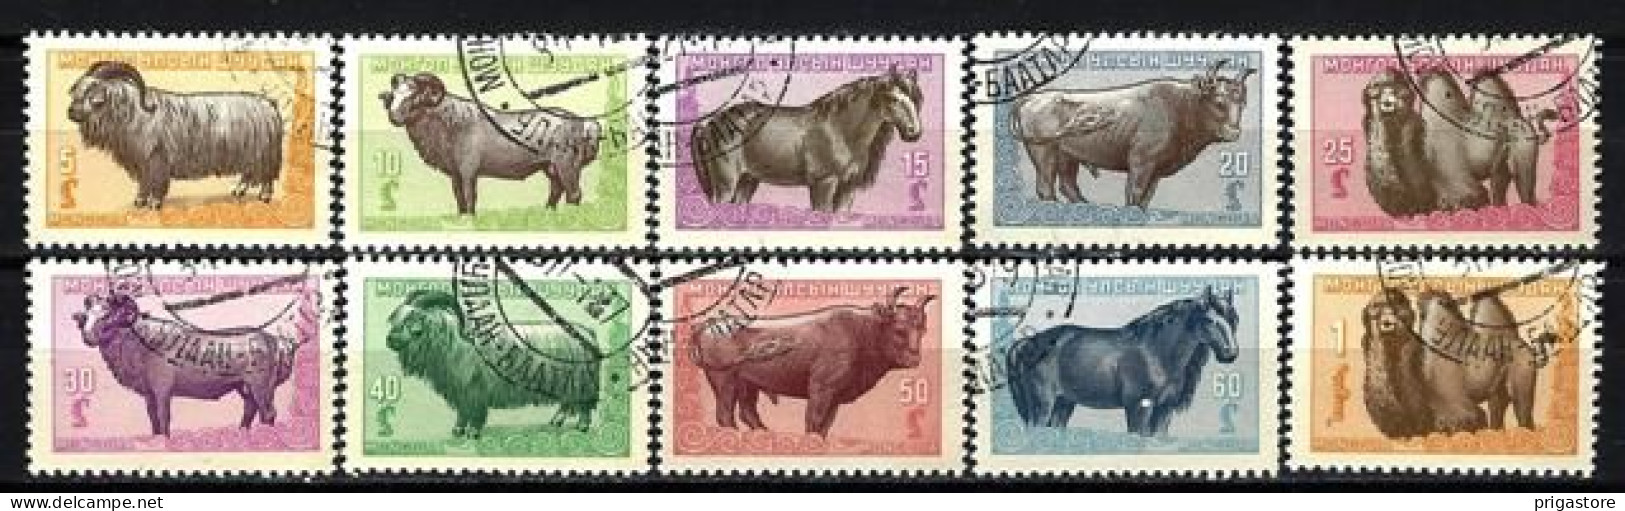 Mongolie 1958 Animaux Sauvages (192) Yvert N° 124 à 133 Oblitérés Used - Afghanistan